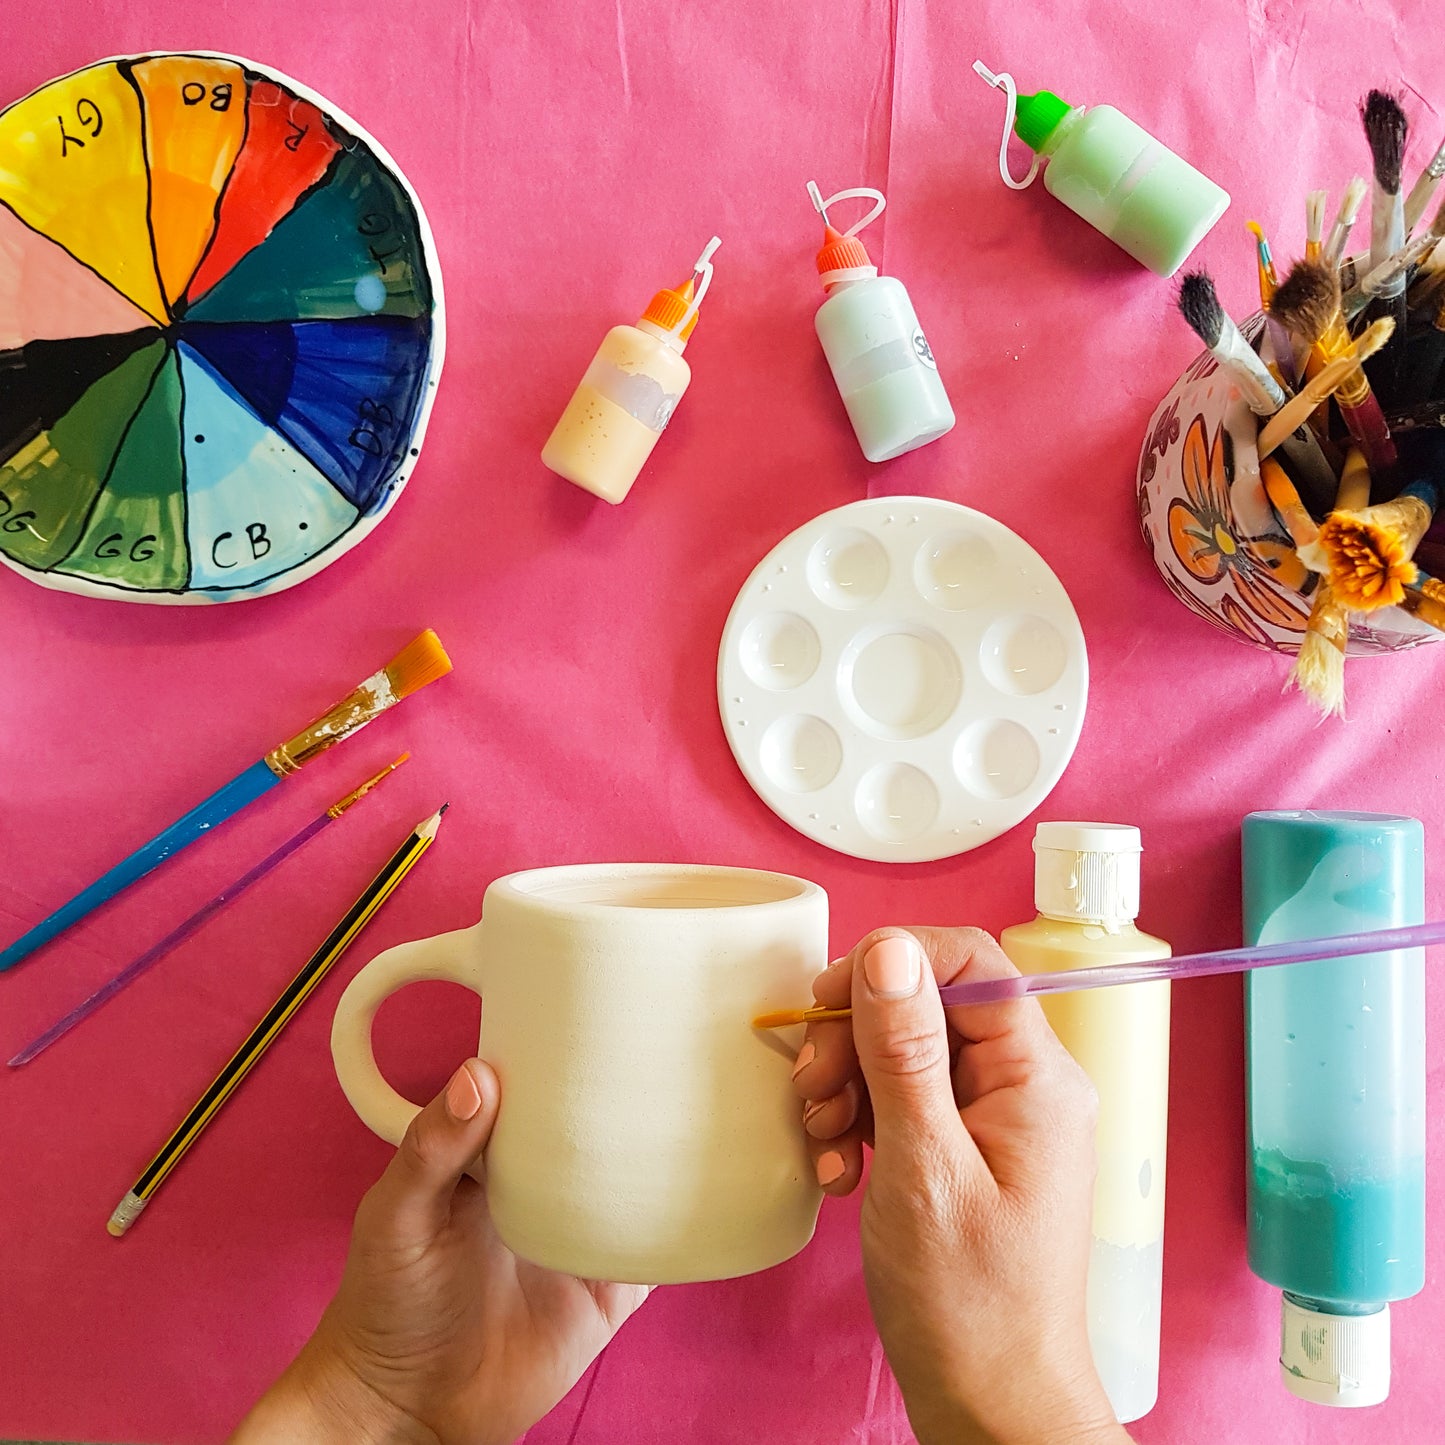 Pottery painting workshop - Paint your own design onto a mug, December 9th